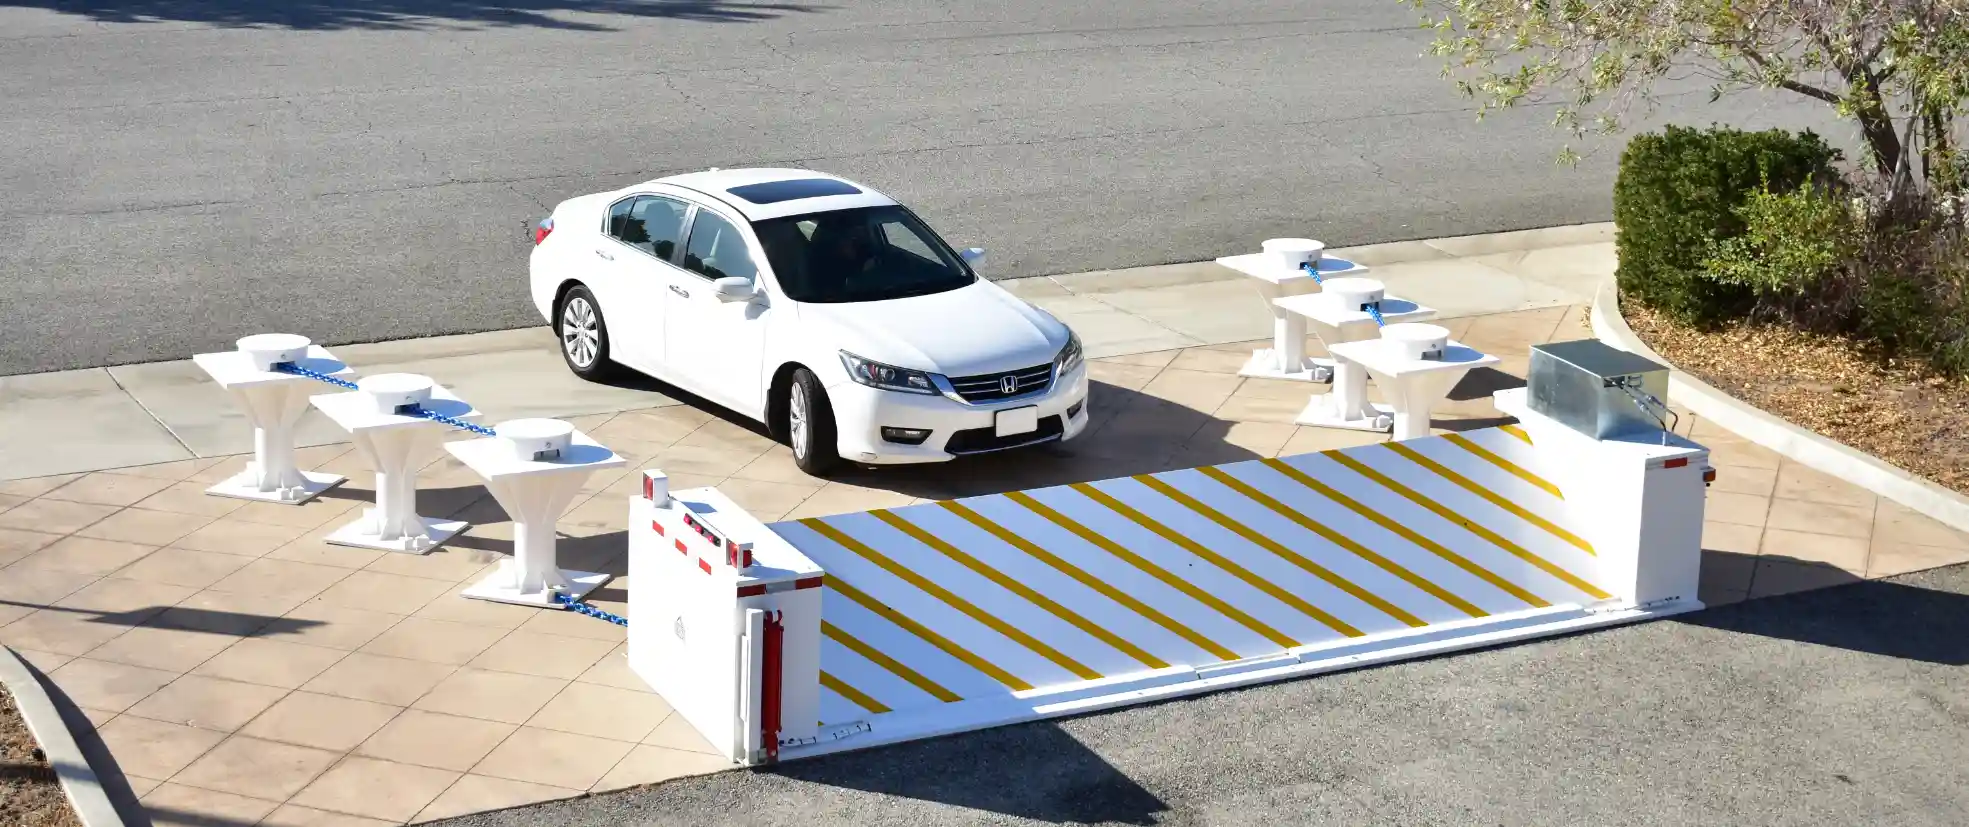 White sedan approaching a Delta Scientific high-security vehicle access control barrier with a deployed arm, showcasing the company's commitment to protecting sensitive areas through advanced engineering and design.